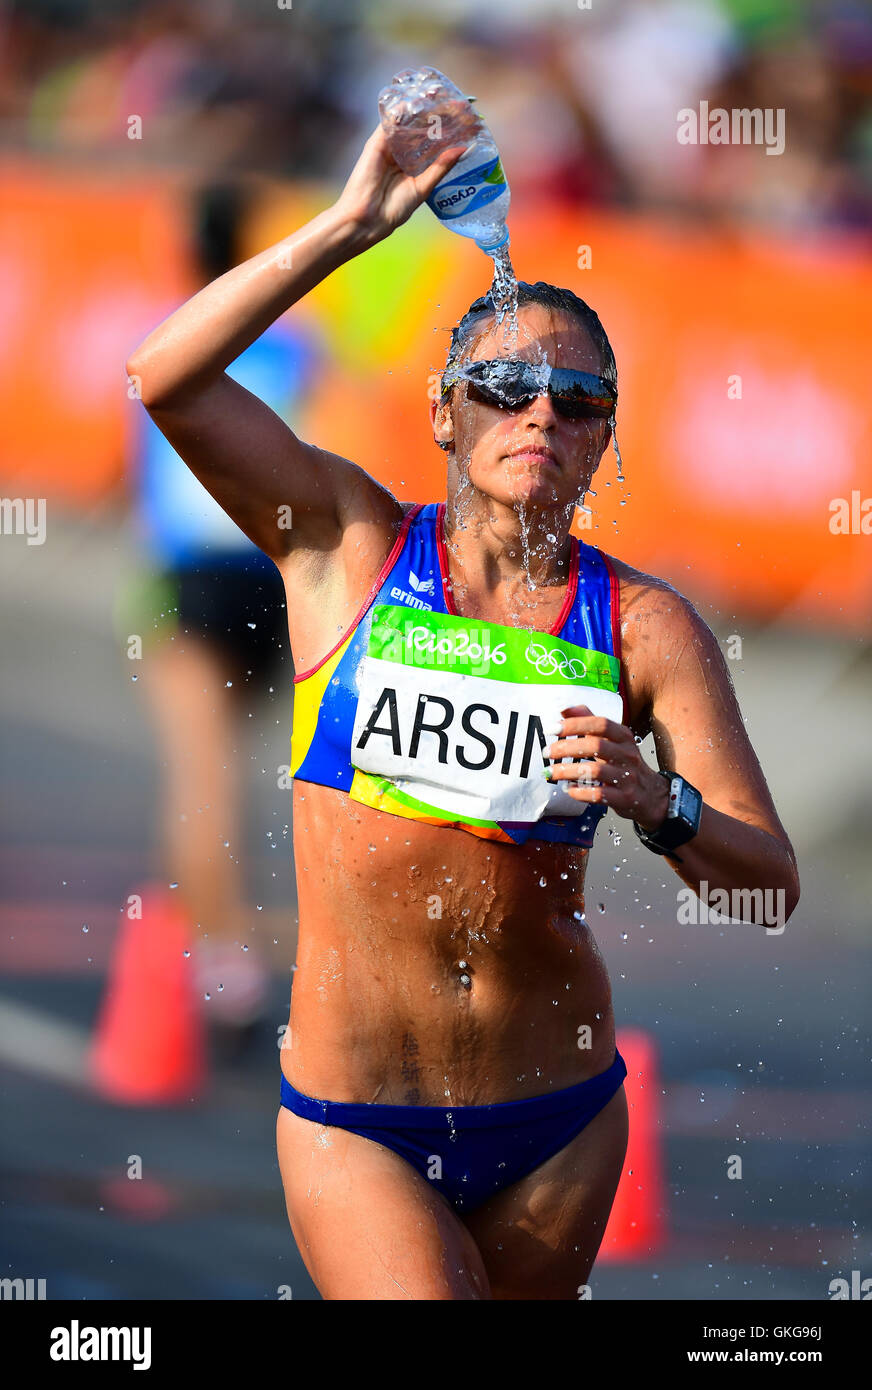 Rio de Janeiro, Brazil. 19th August, 2016. Sandra Arenas of Colombia pours water over her head during the womens 20km race walk on Day 14 of the 2016 Rio Olympics at Pontal on August 19, 2016 in Rio de Janeiro, Brazil. (Photo by Roger Sedres/Gallo Images) Credit:  Roger Sedres/Alamy Live News Stock Photo